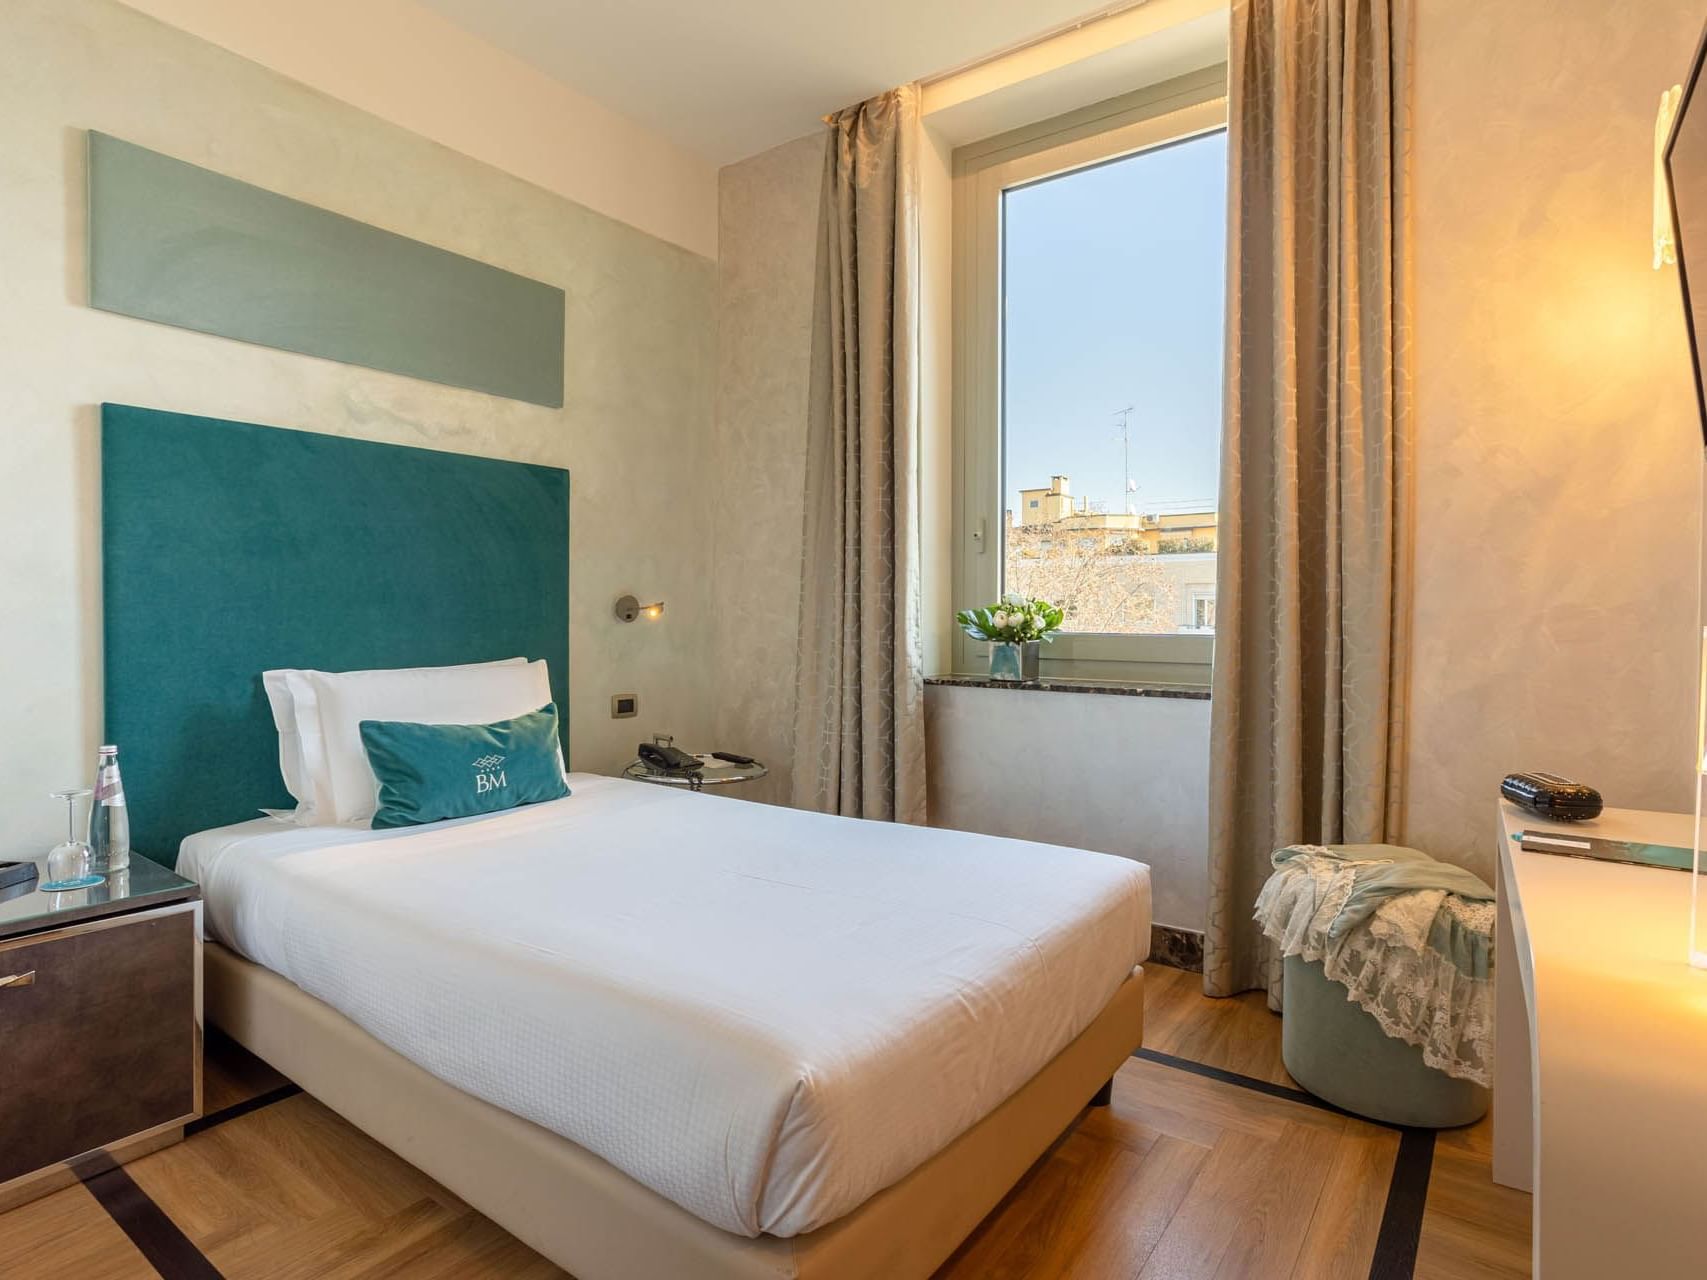 Comfort queen single room at Bianca Maria Palace Hotel in Milan